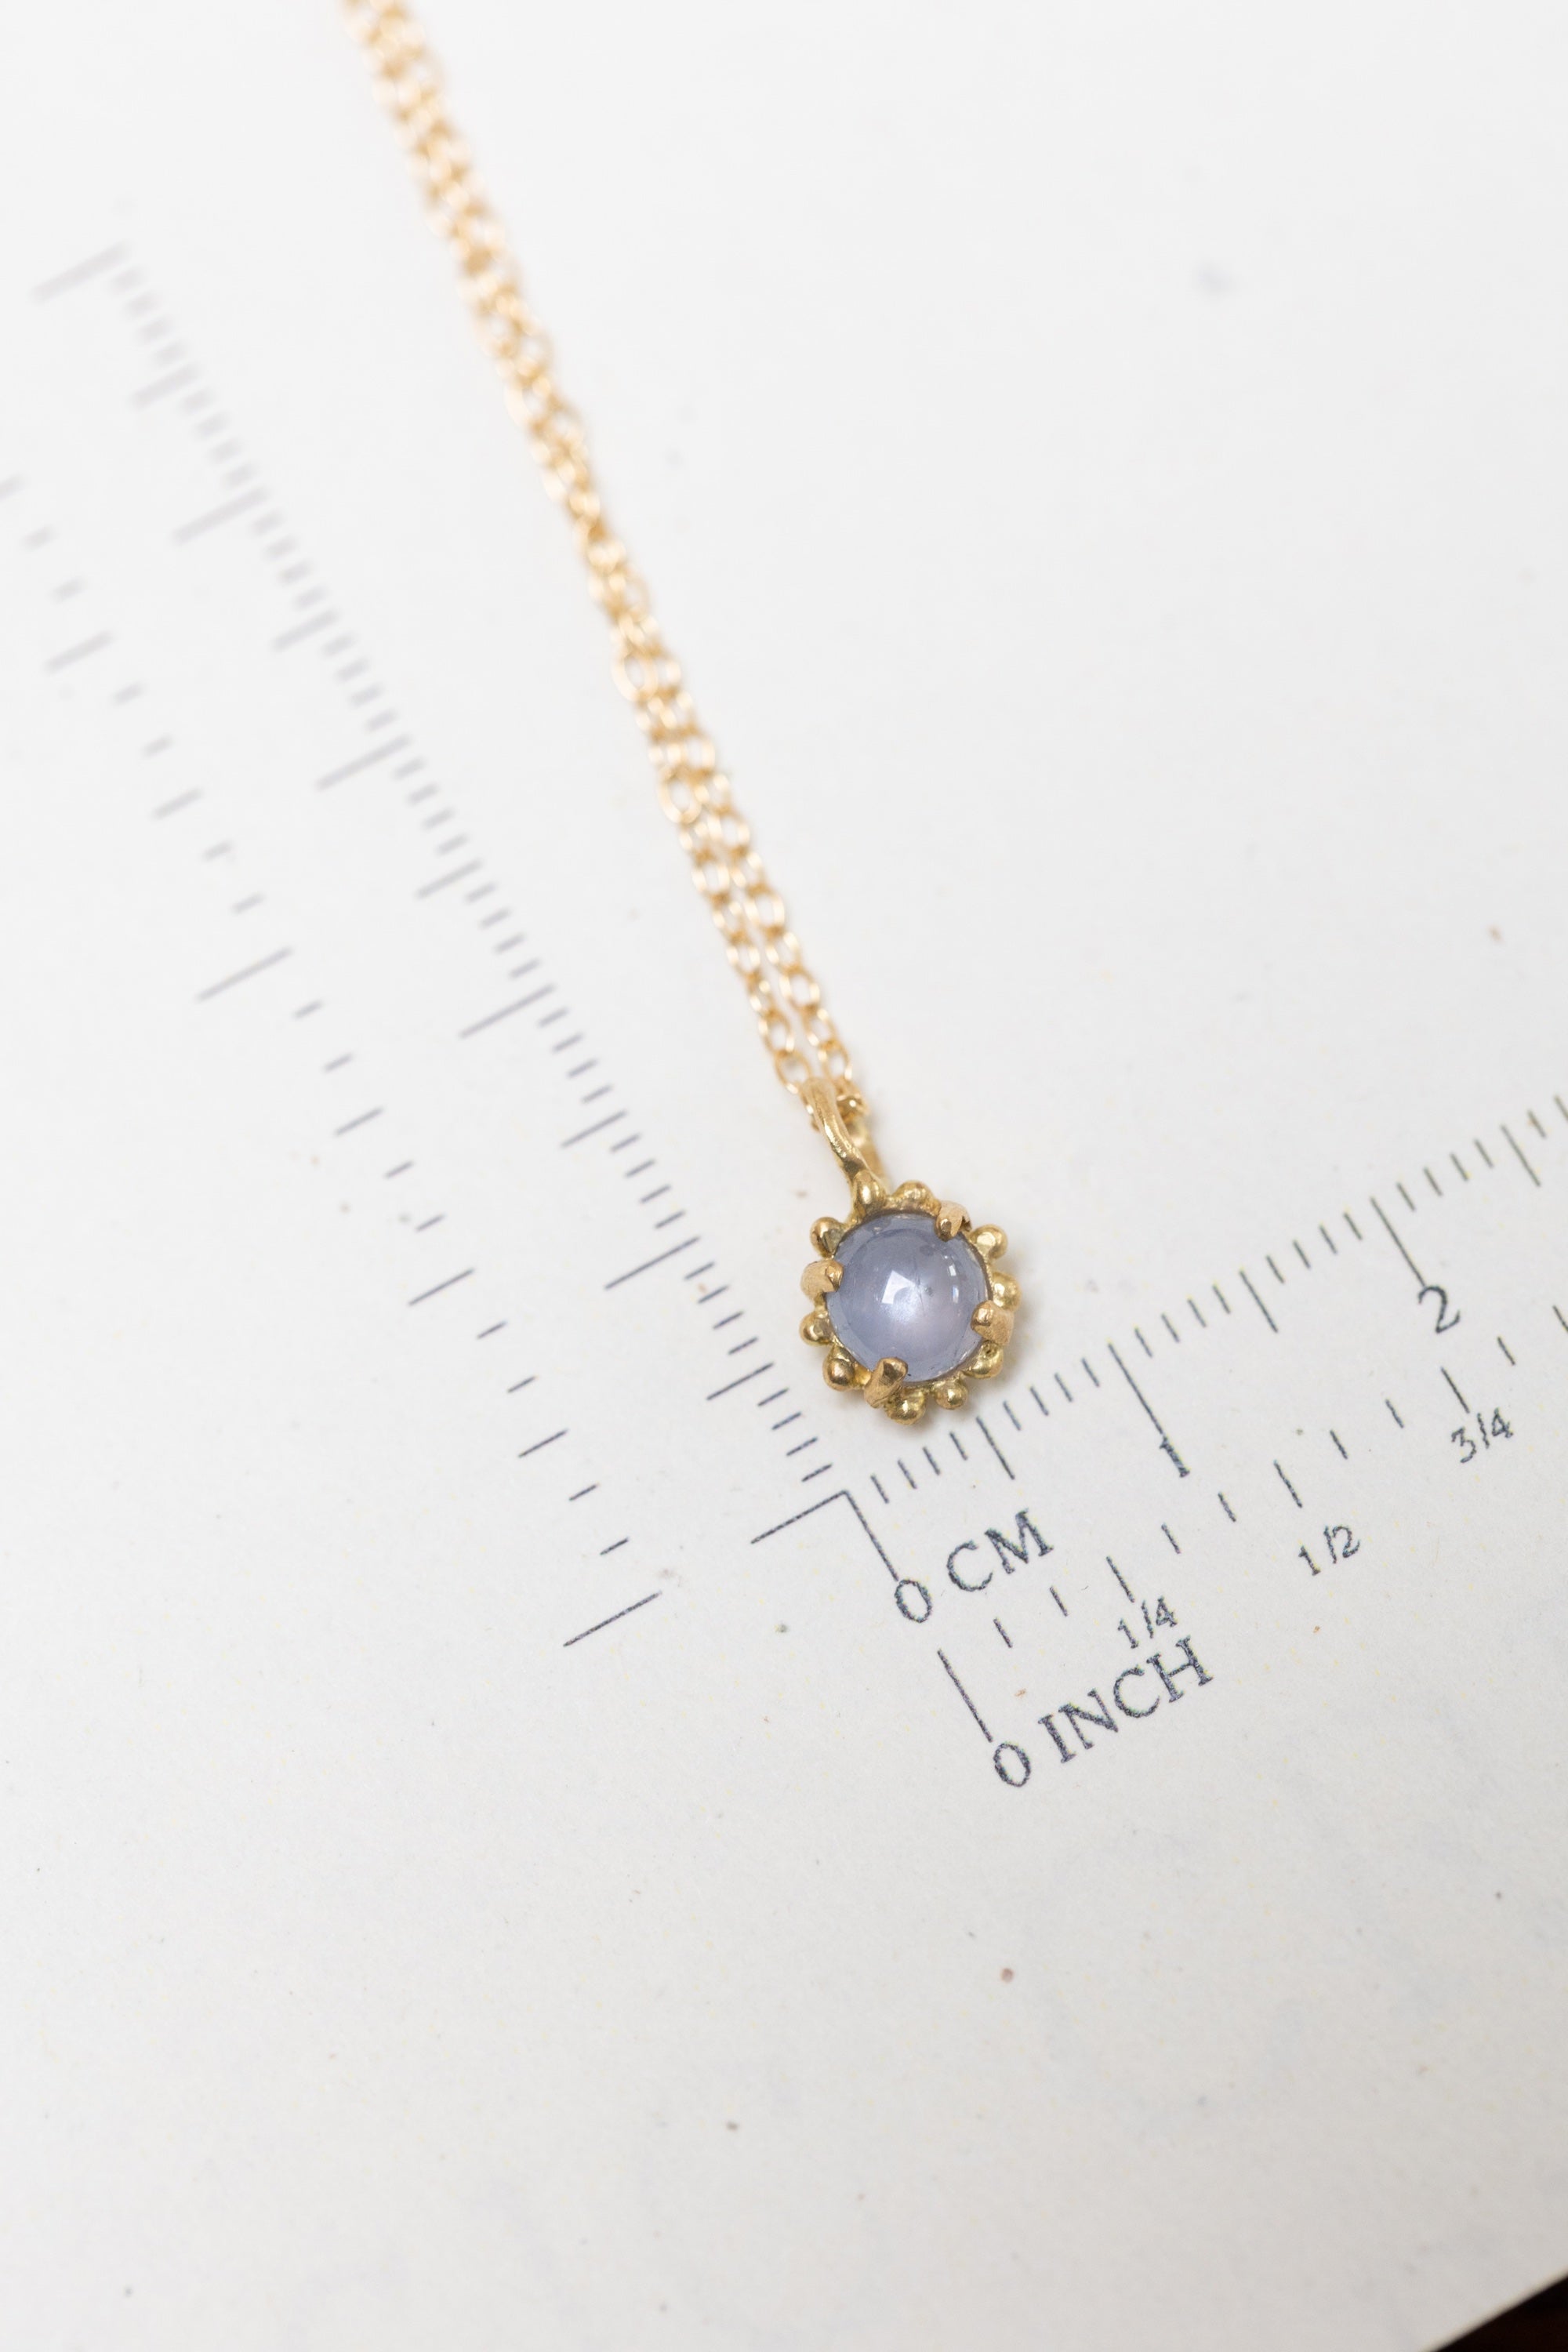 Small Star Sapphire Surrounded by Tiny Dots (18k)